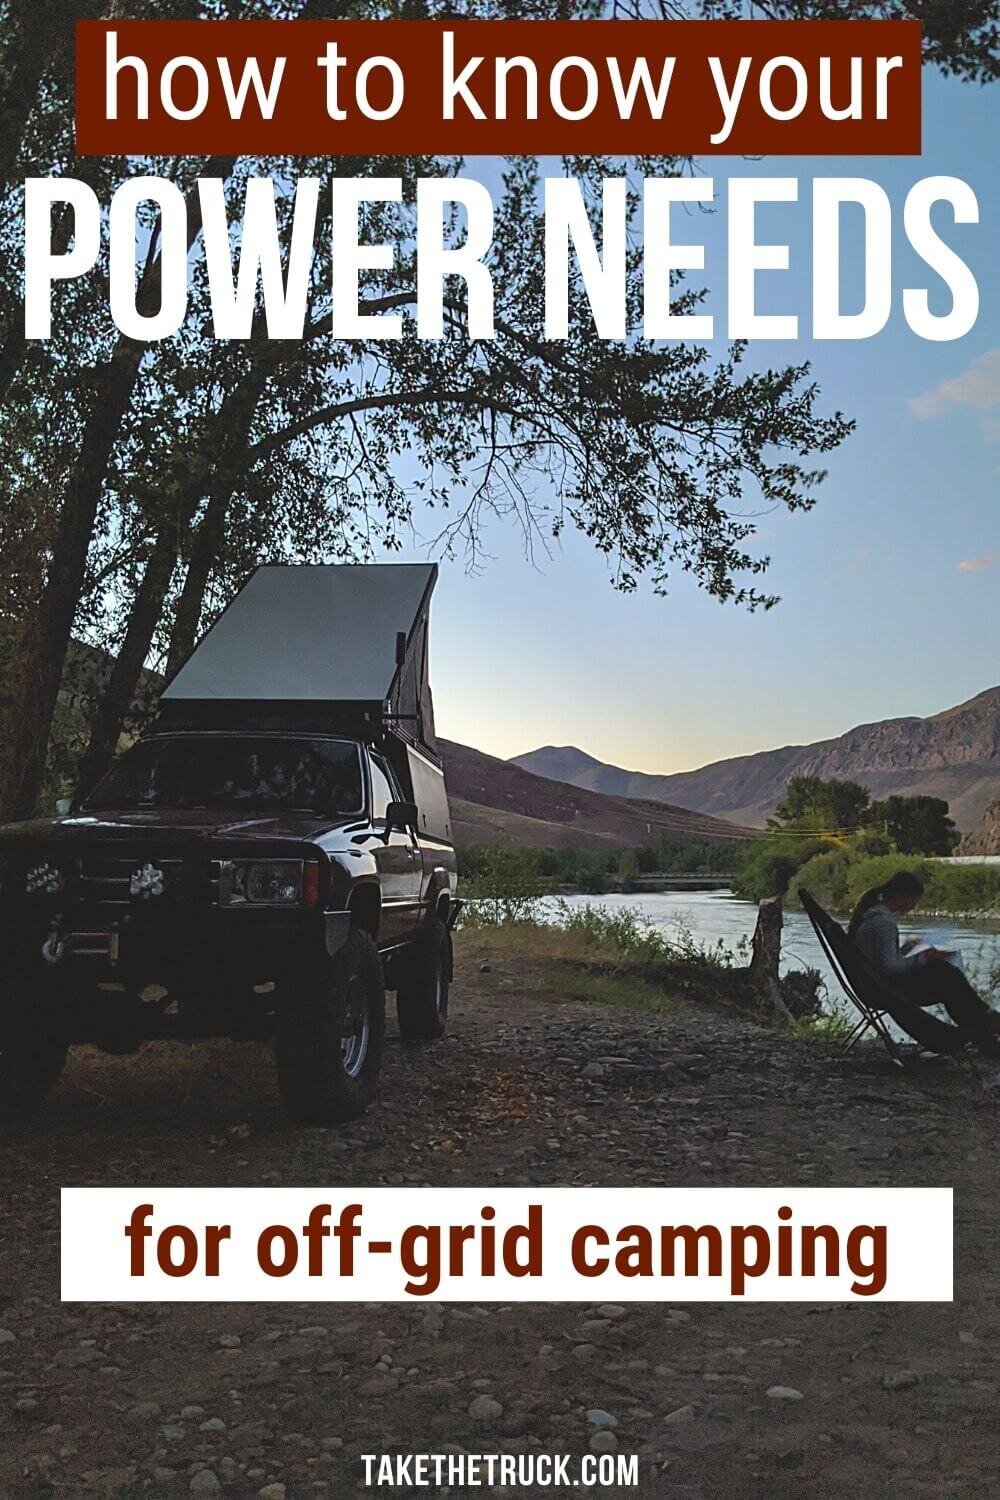 This post will help you calculate your power consumption while camping so you can select the right camping power supply for your needs, whether in a van, truck bed, suv, or other camper. 